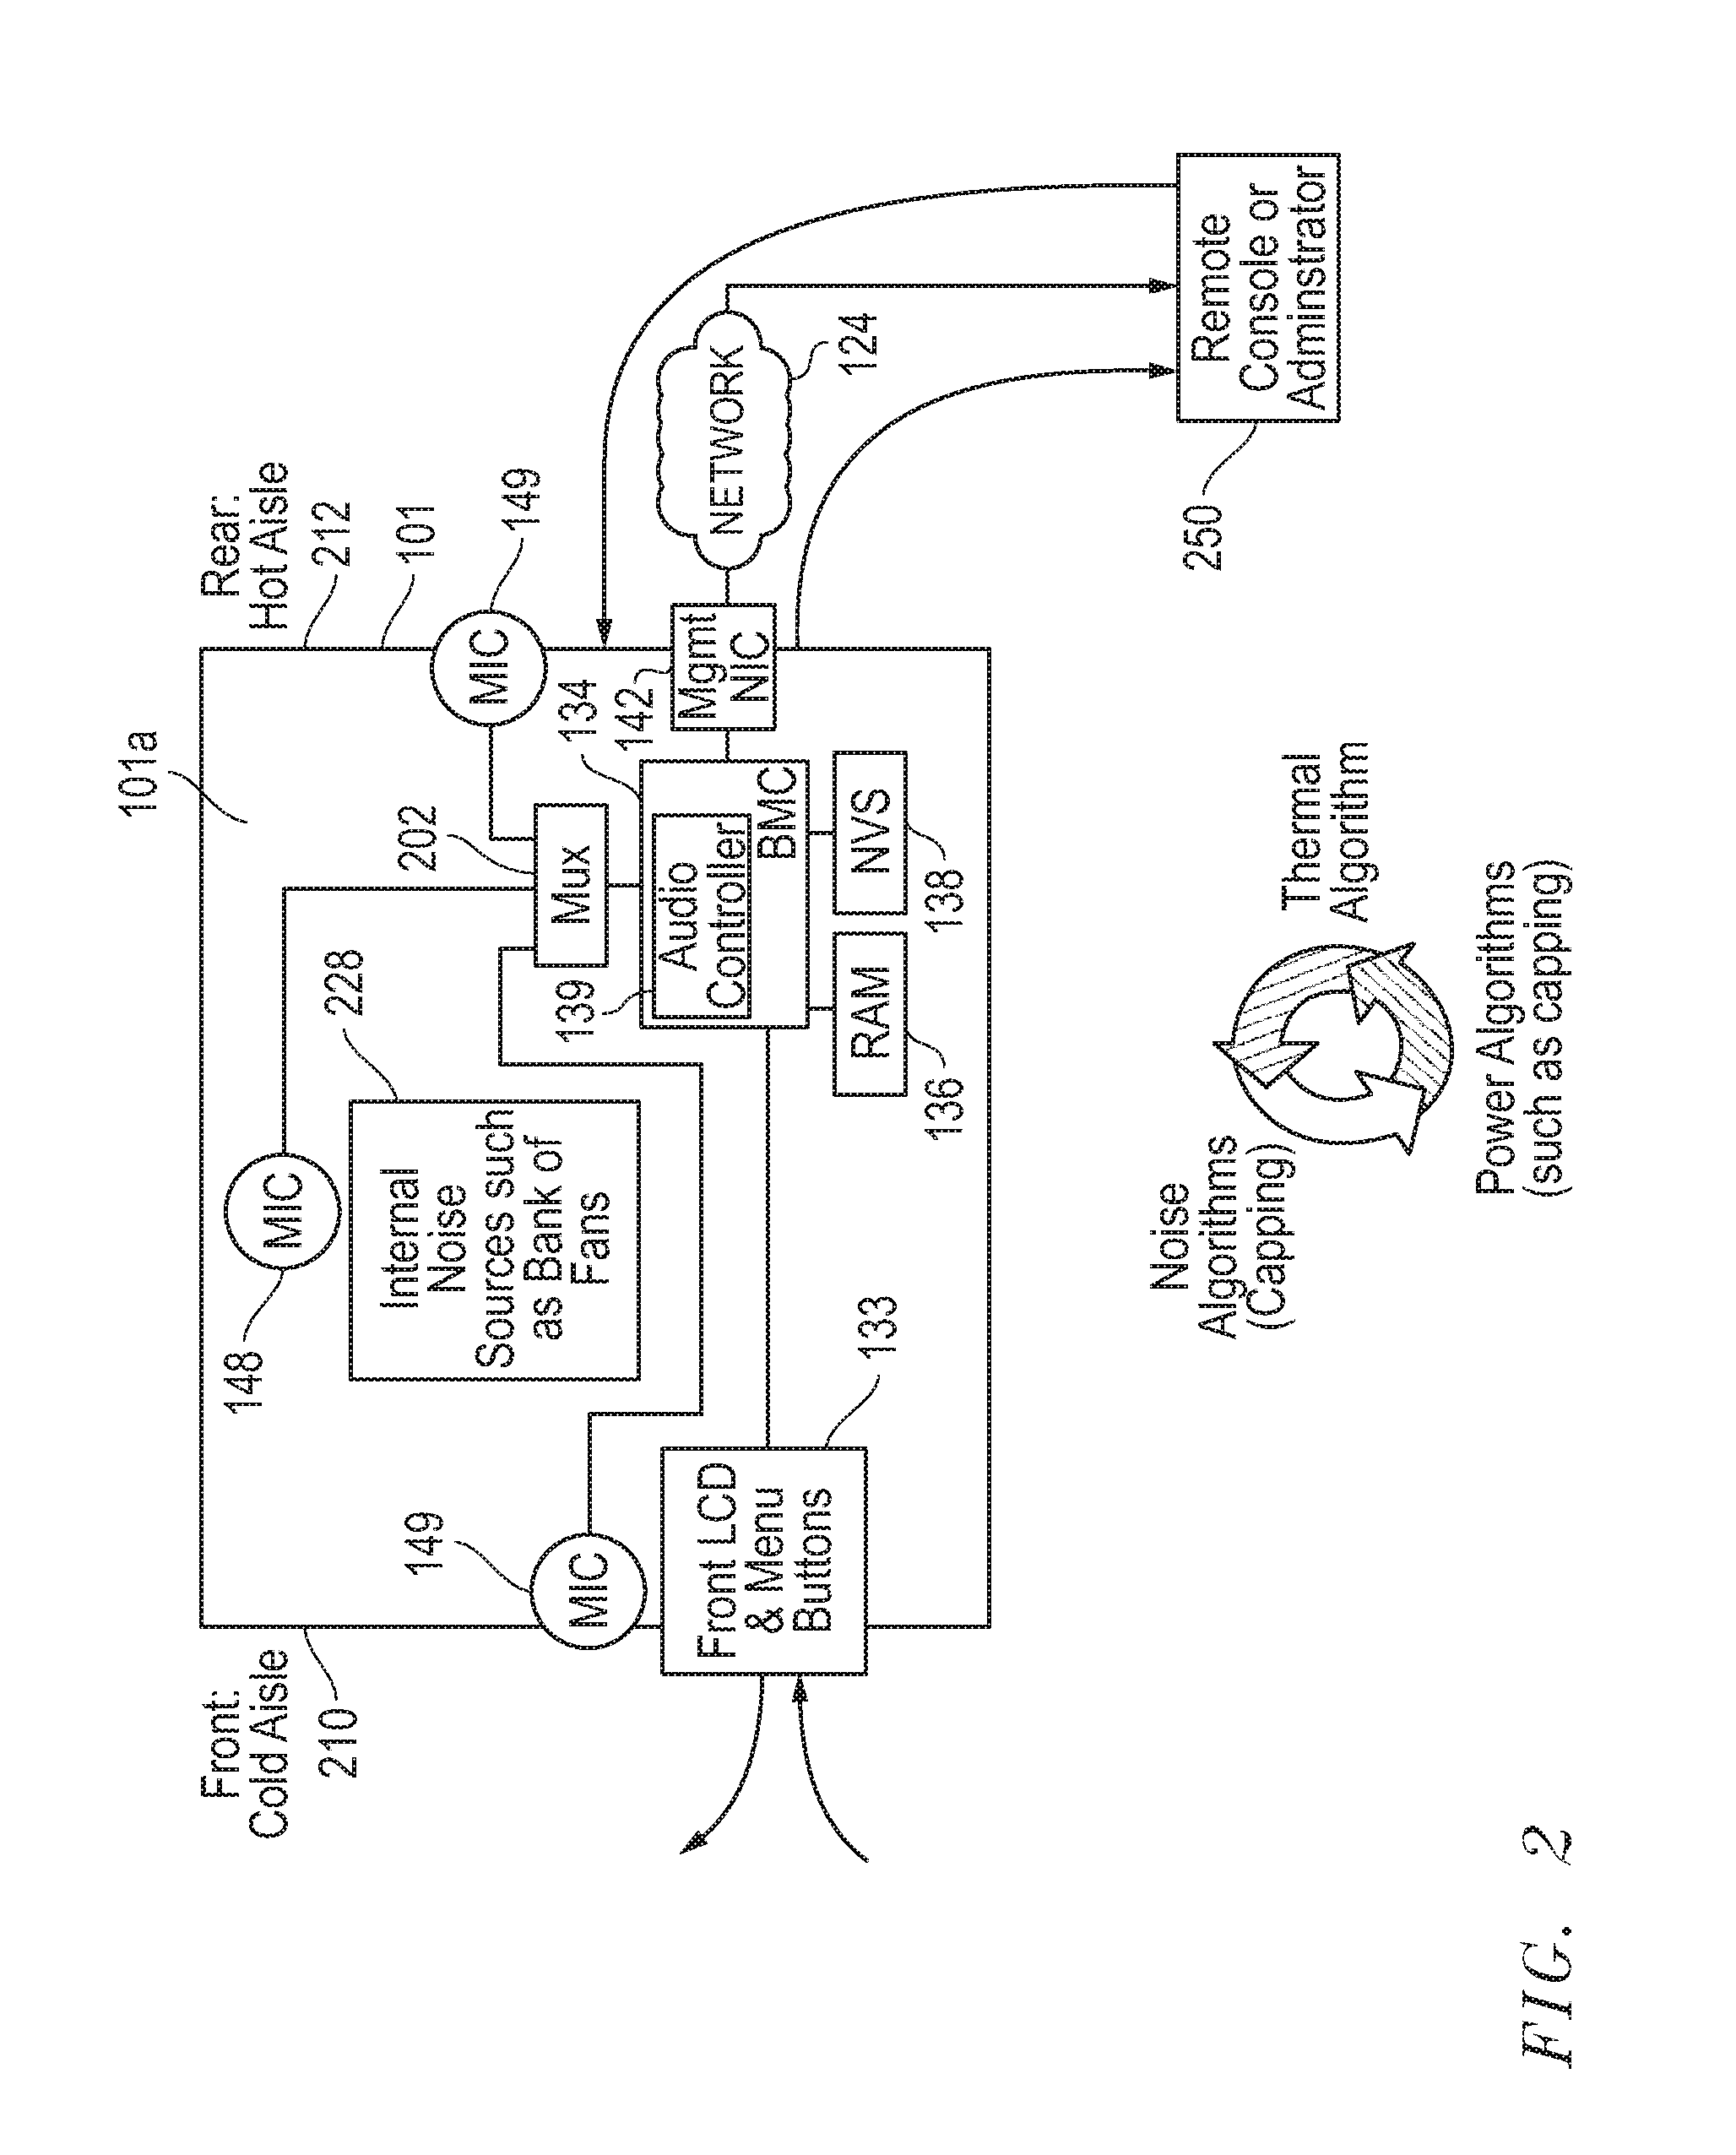 Systems and methods for local and remote recording, monitoring, control and/or analysis of sounds generated in information handling system environments